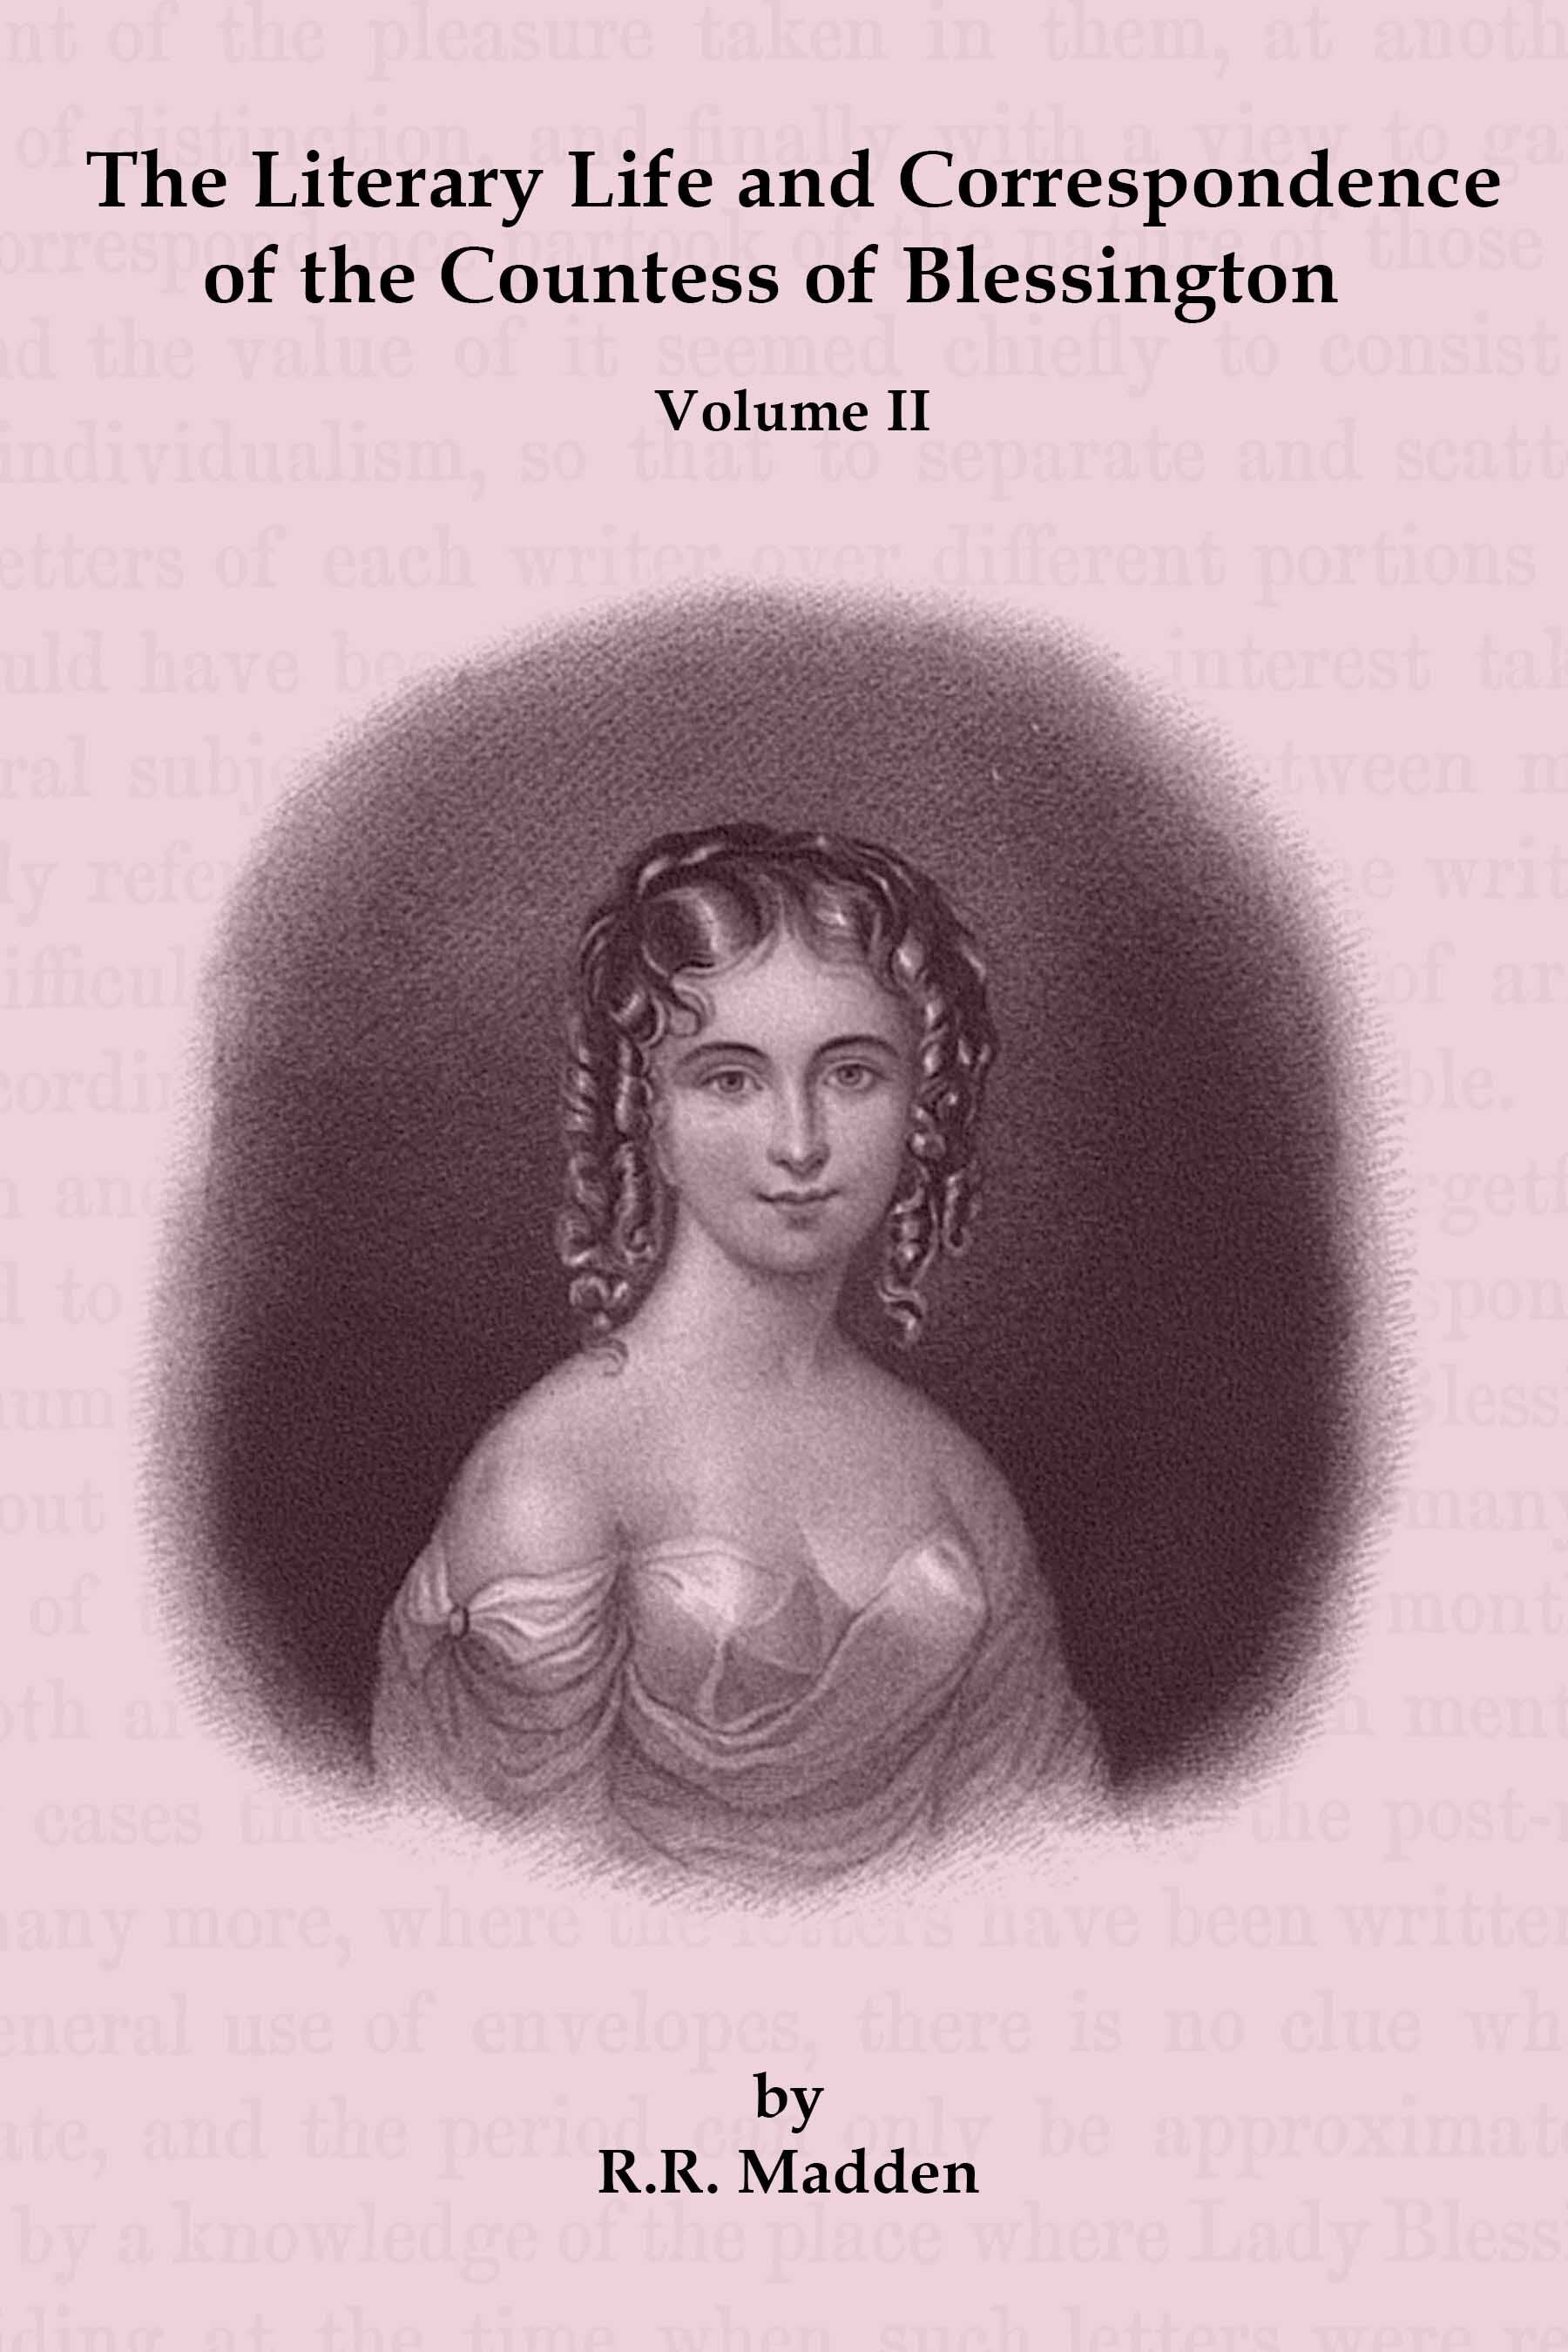 The Literary Life & Correspondence of the Countess of Blessington: Volume II